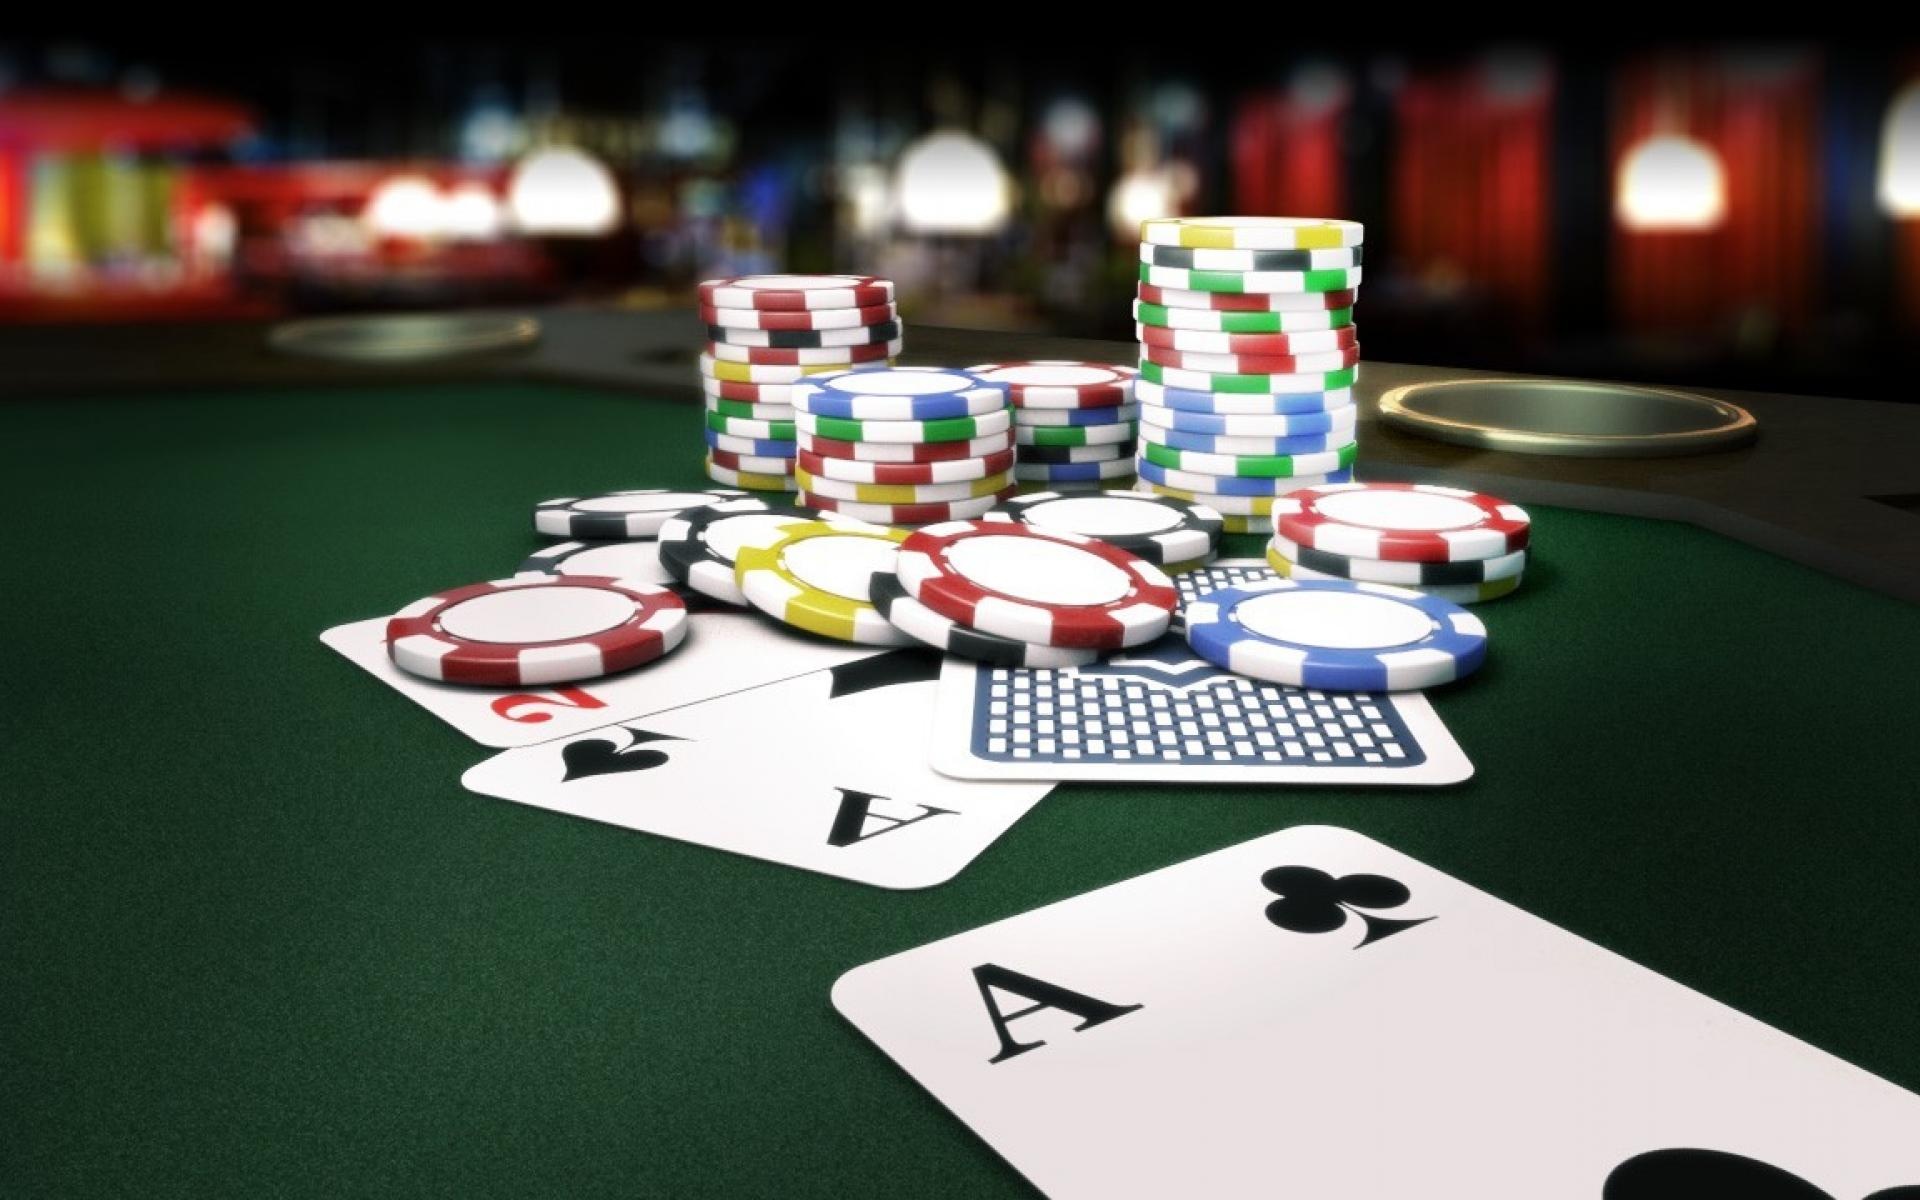 Poker: The chip values, 4-3-2-1 rule, 40 chips per person, Cash games. 1920x1200 HD Wallpaper.